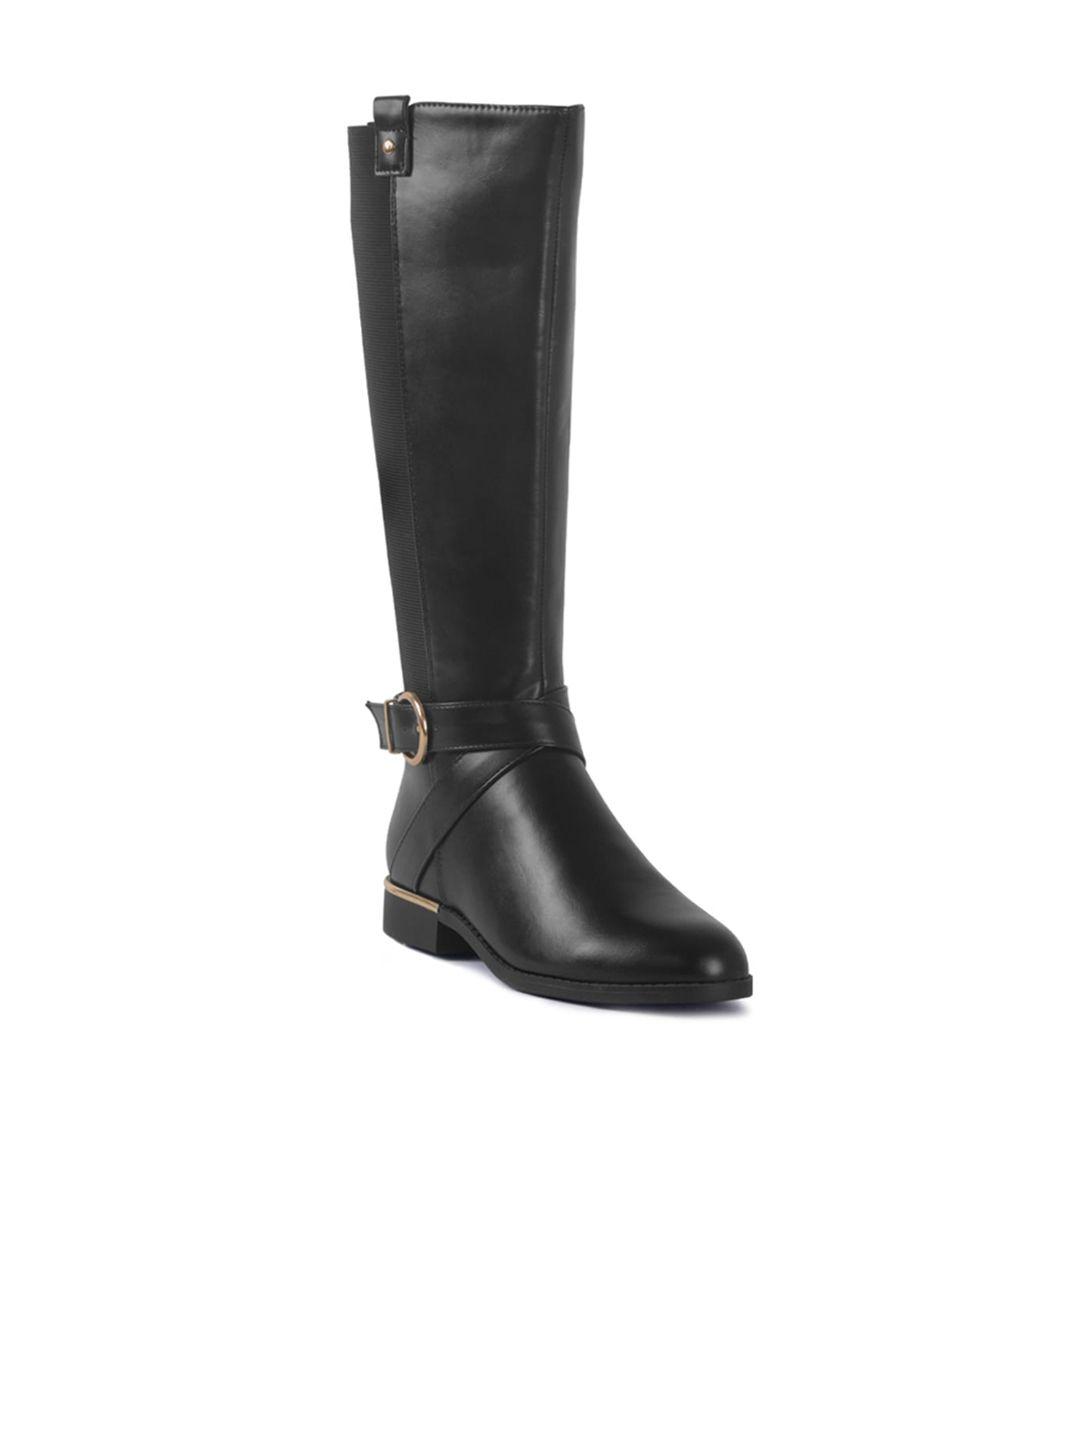 london rag black high-top block heeled boots with buckles